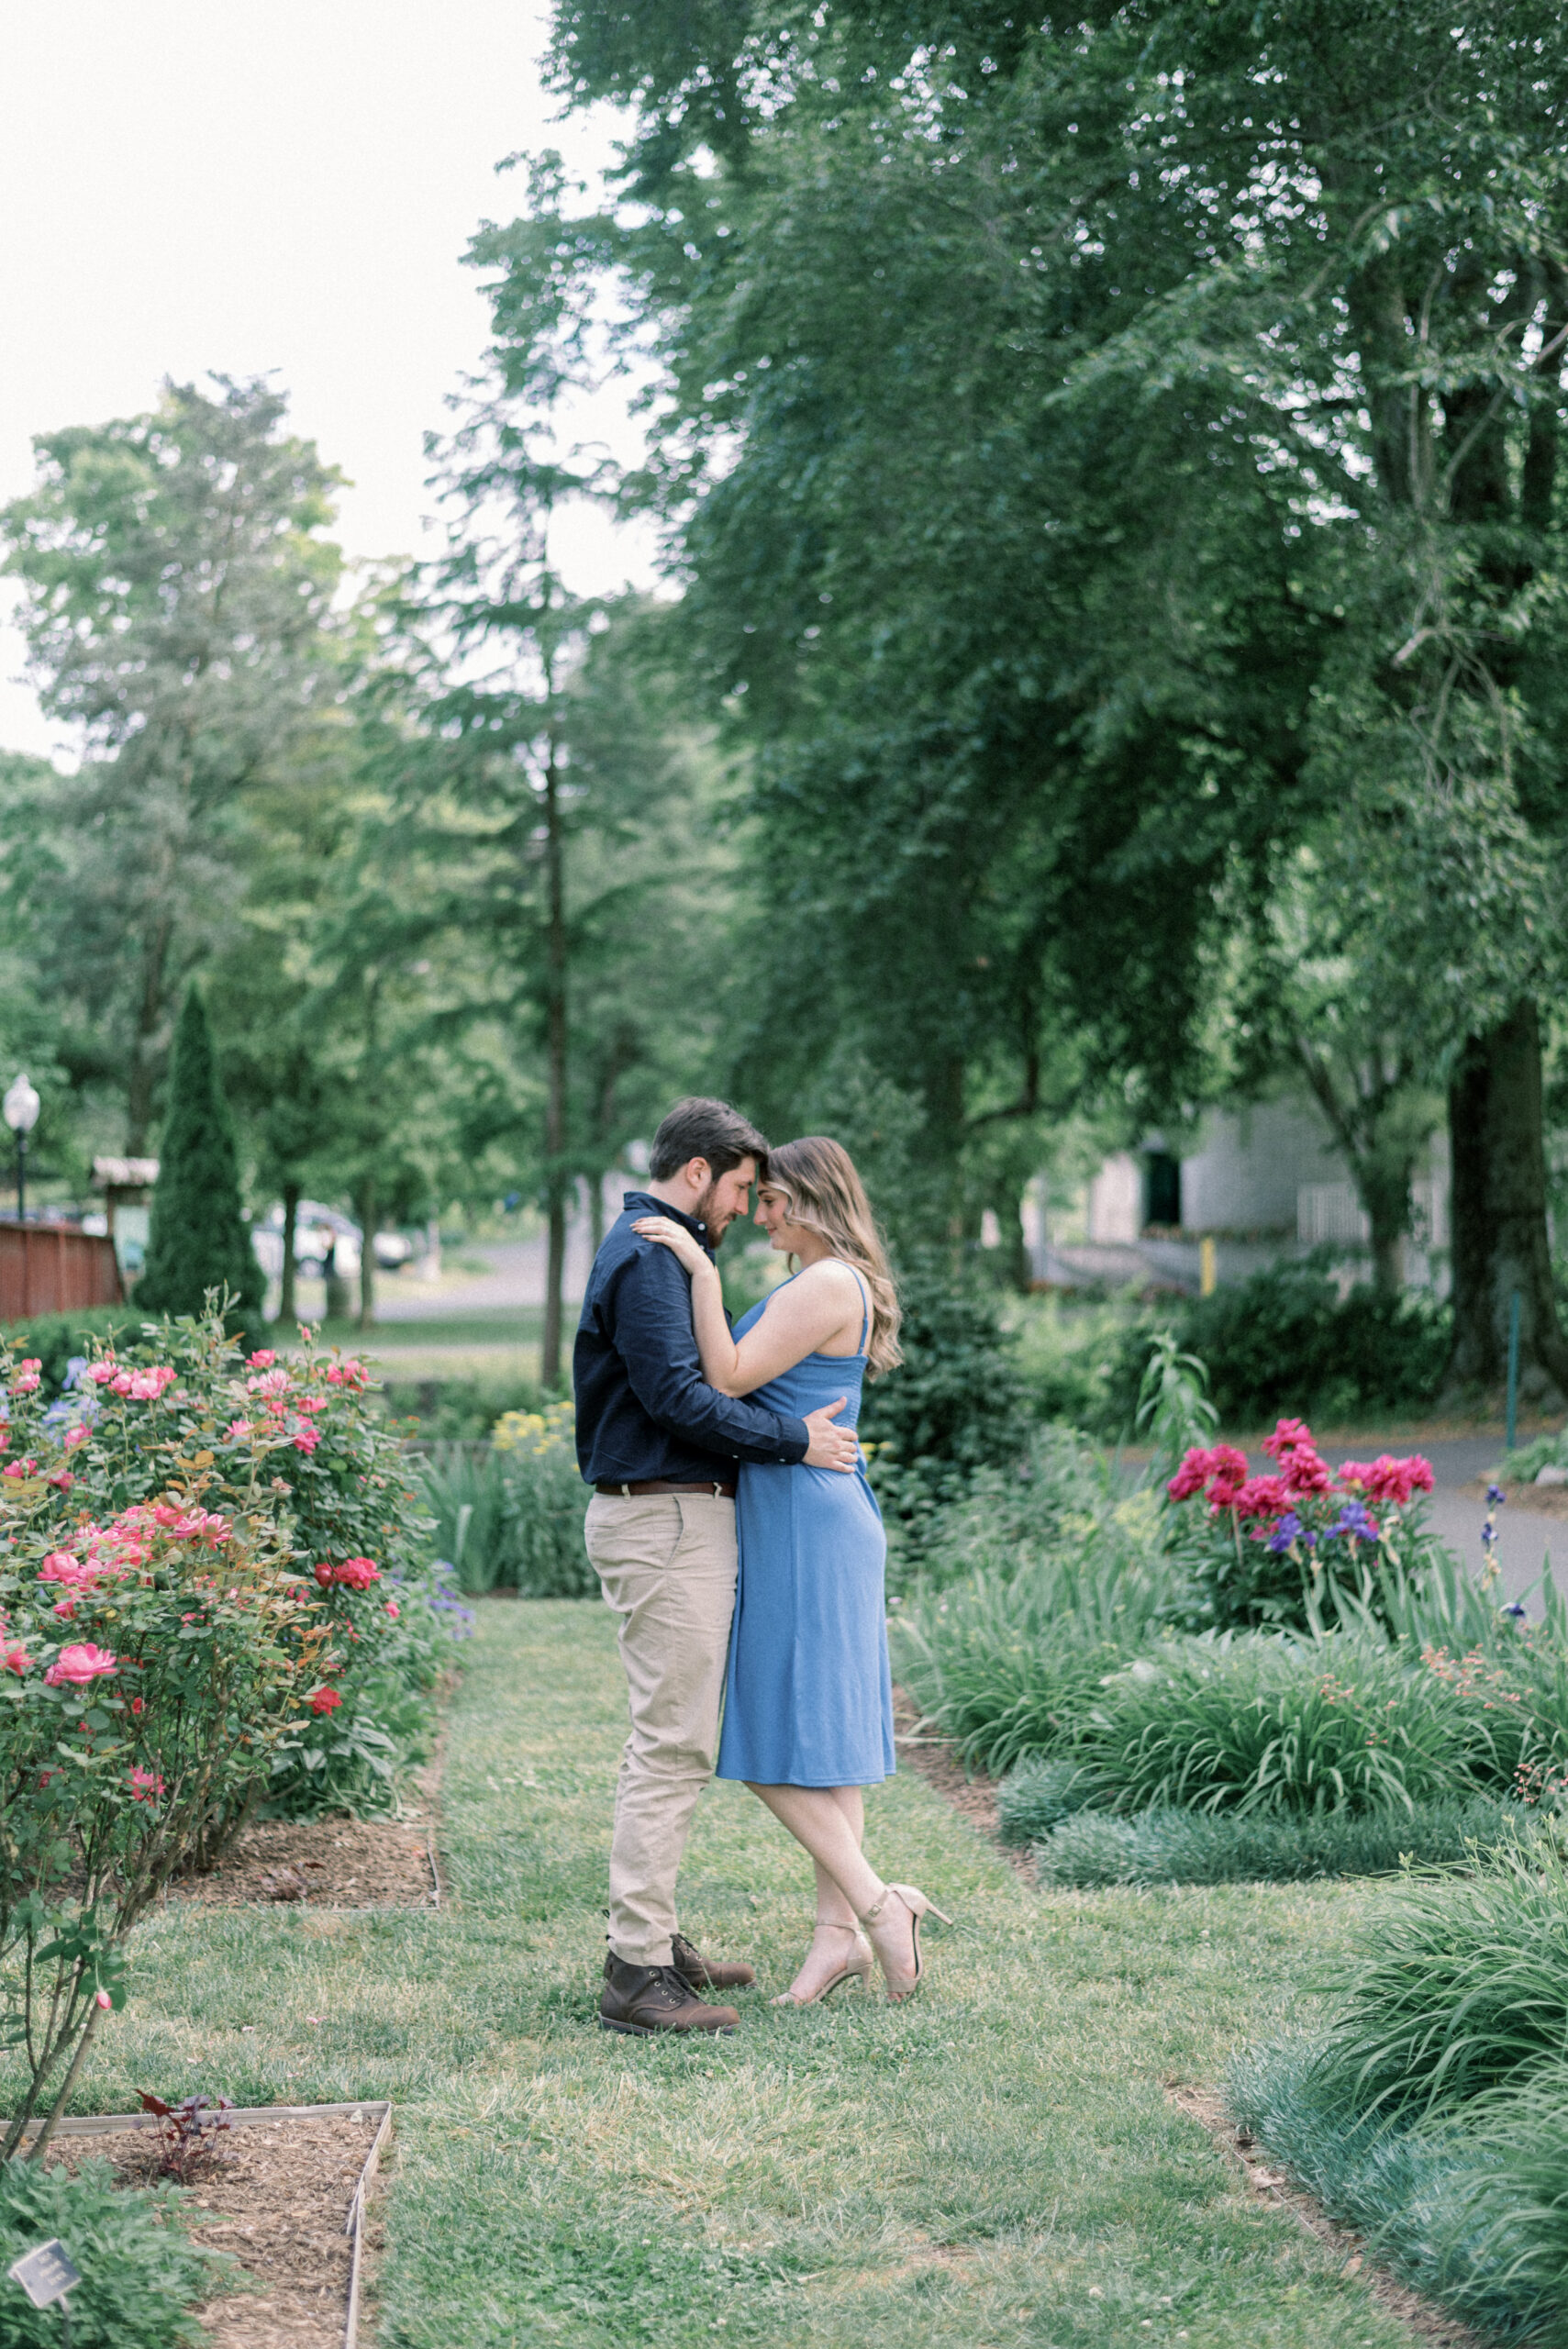 Maryland wedding photographer captures man and woman embracing in gardens during engagement portraits